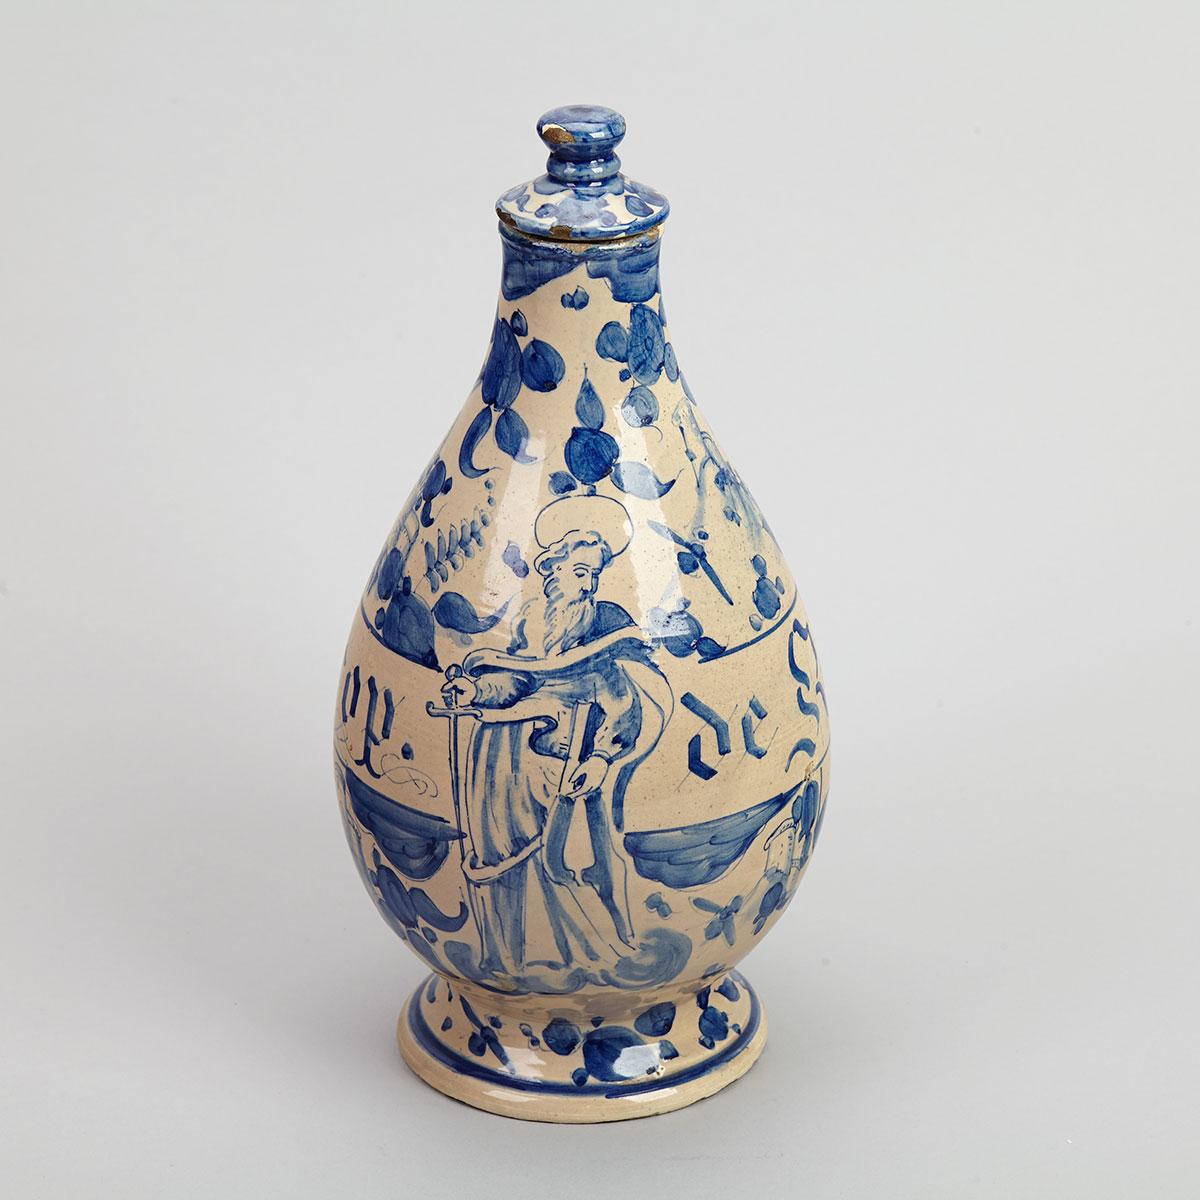 Maiolica Bottle with Stopper, 19th century